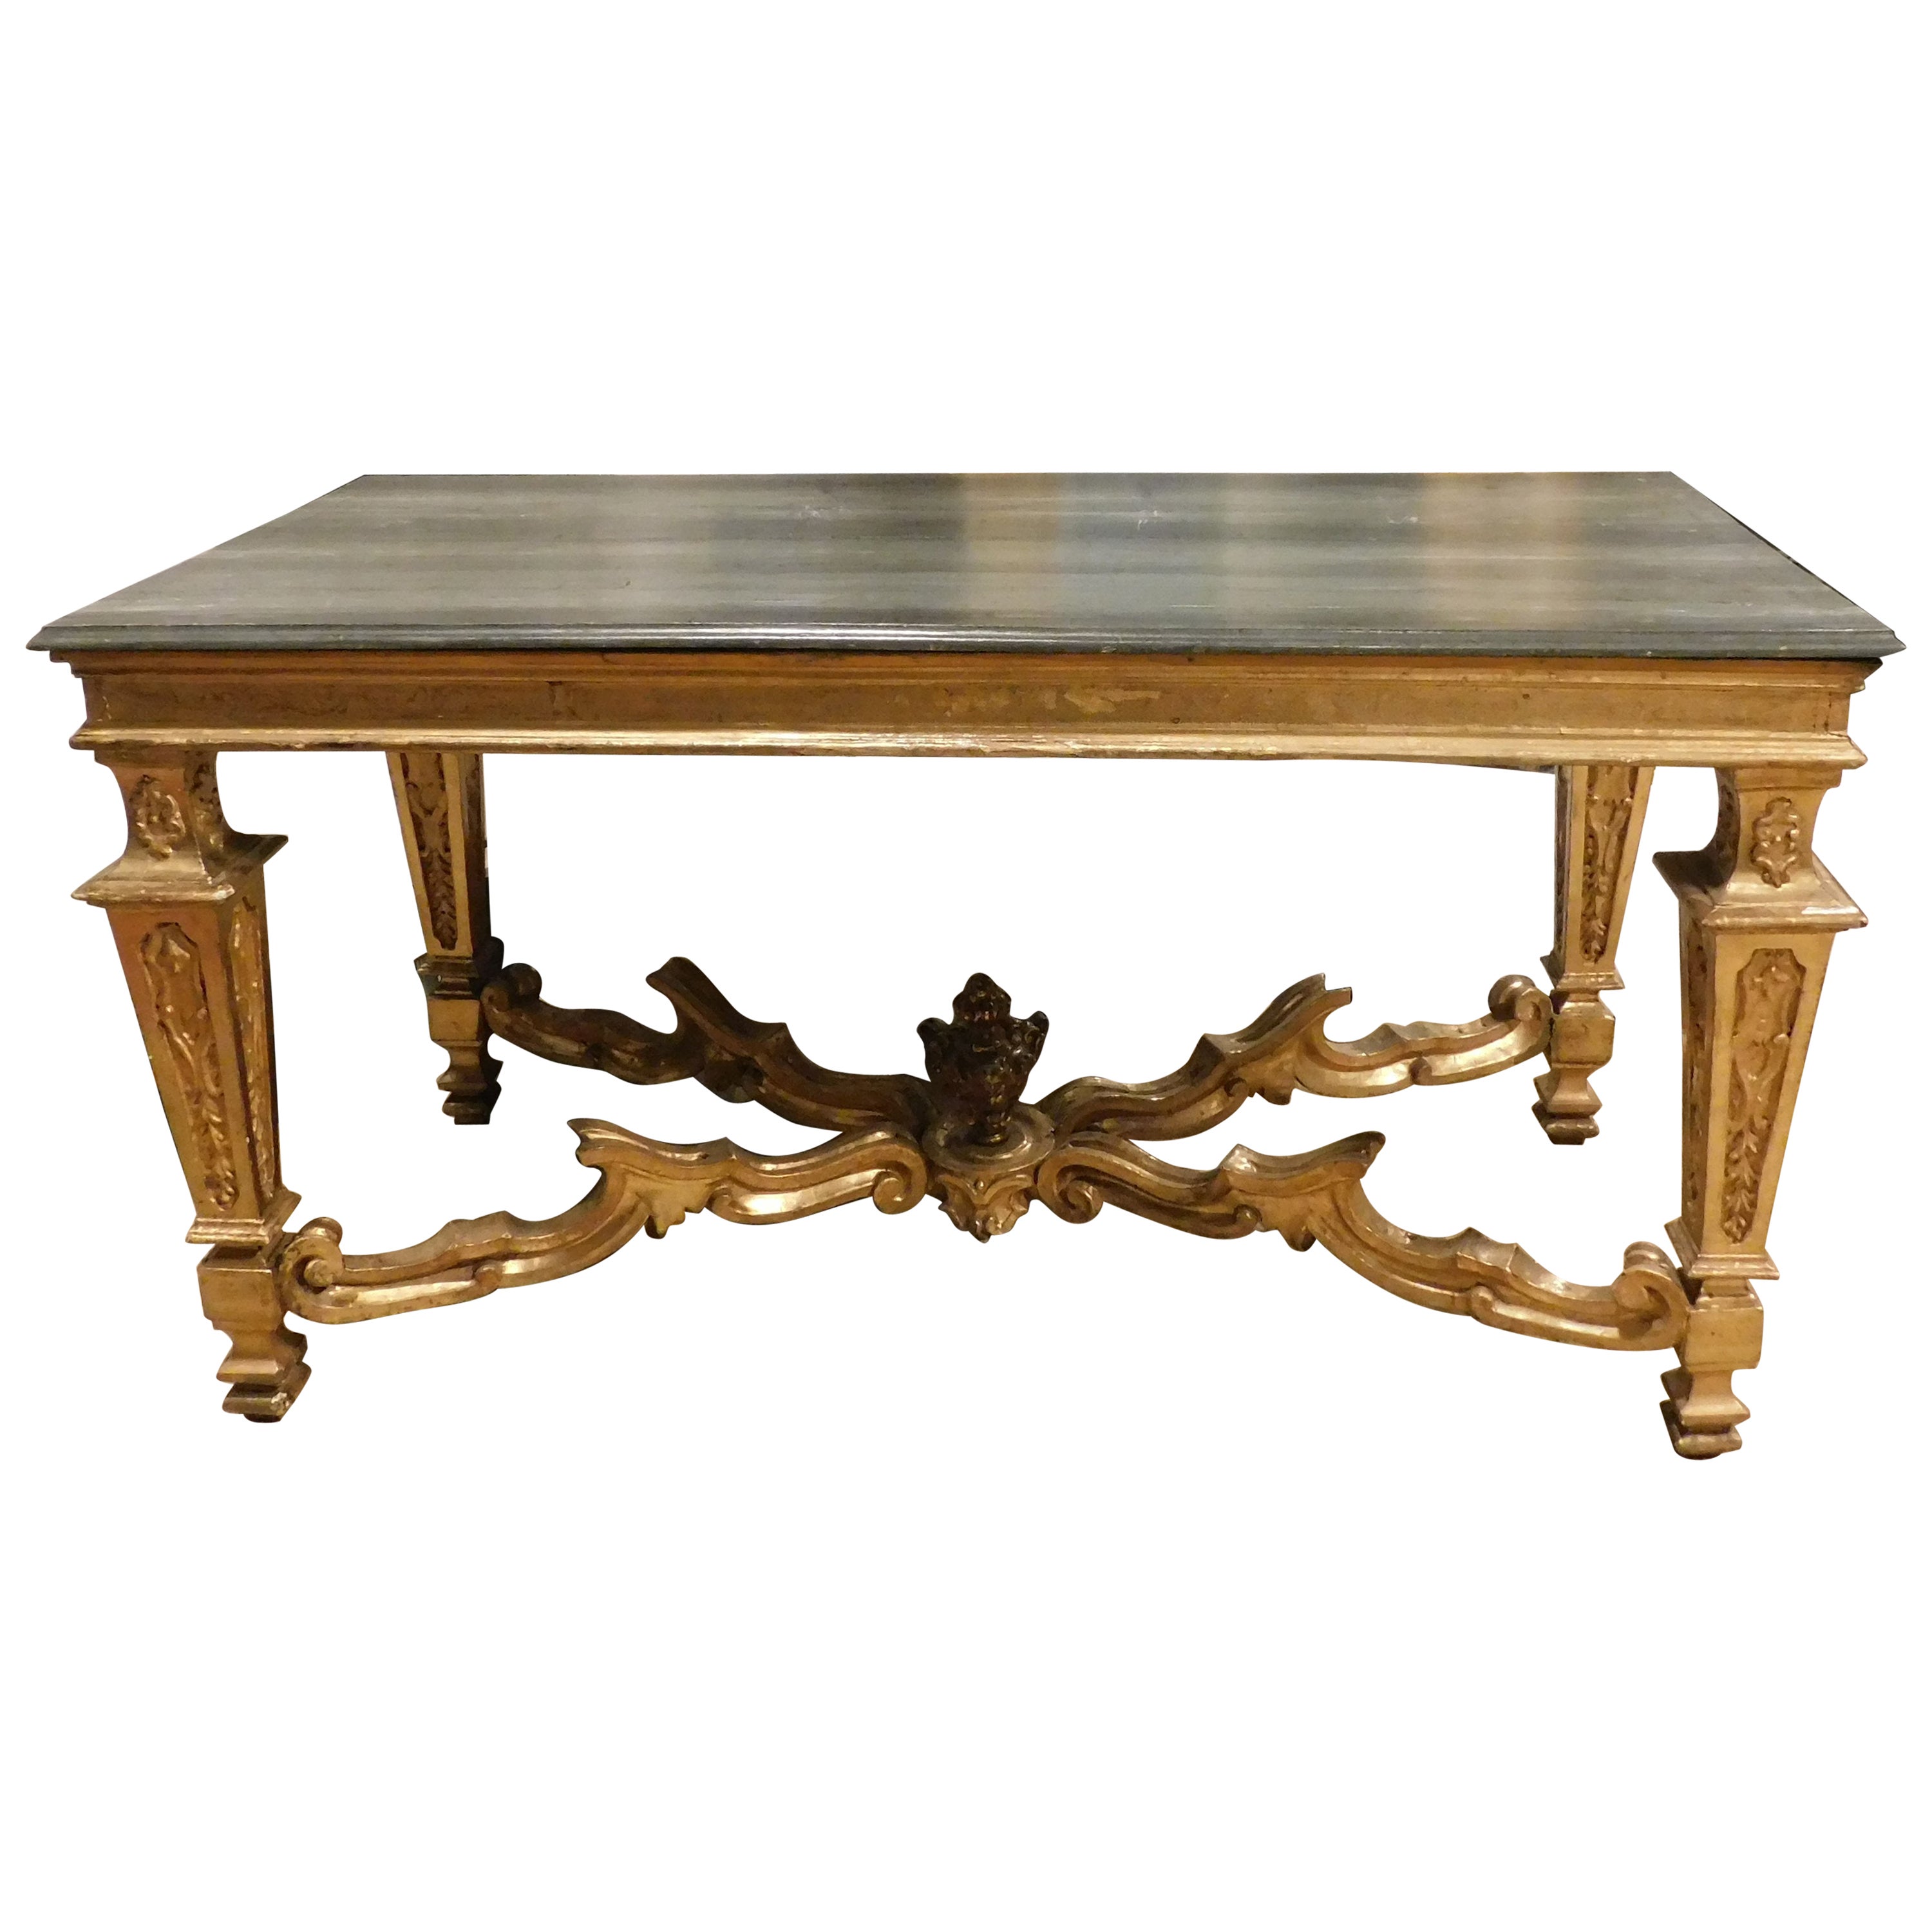 Antique Table-Console in Lacquered and Gilded Wood, First Half of the 18th Centu